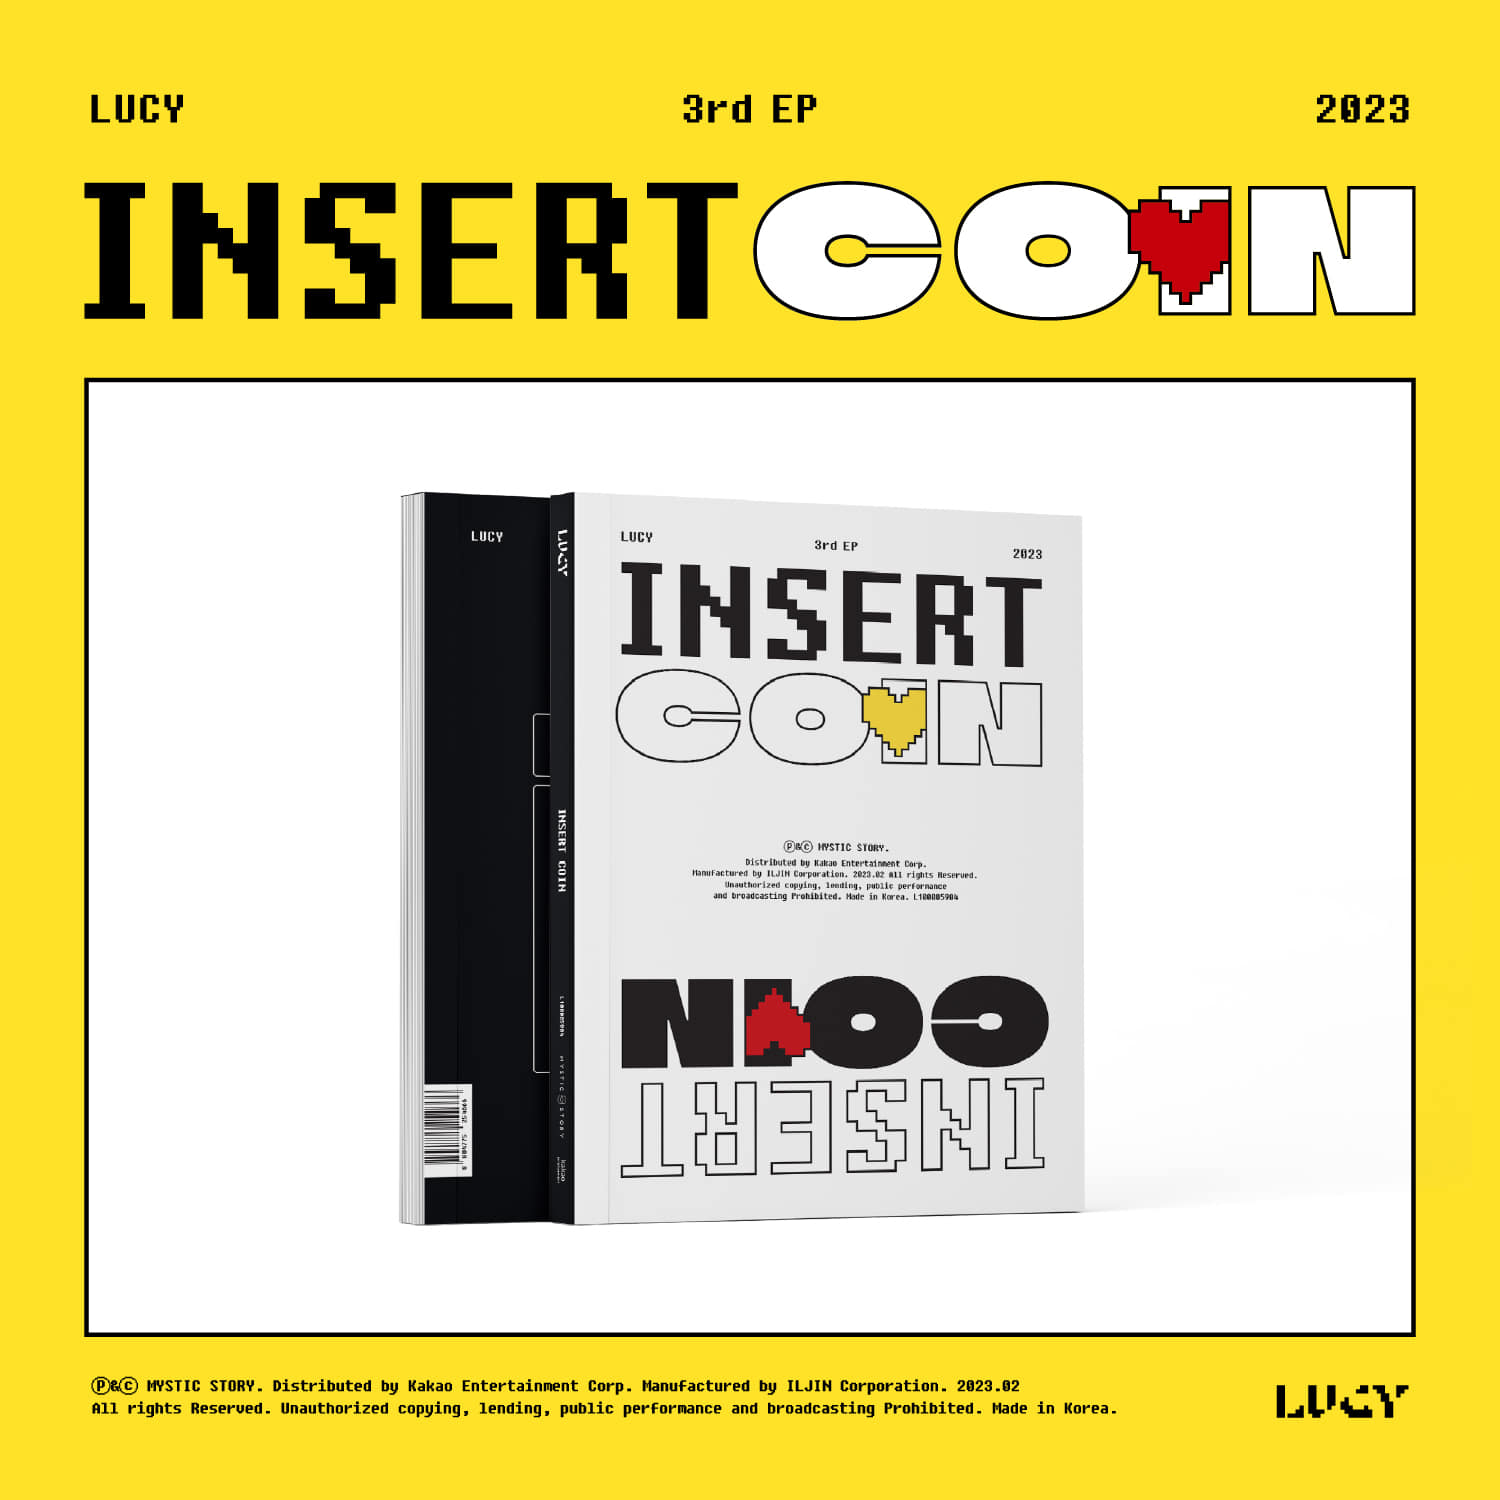 LUCY(루시) - 3rd EP [INSERT COIN]